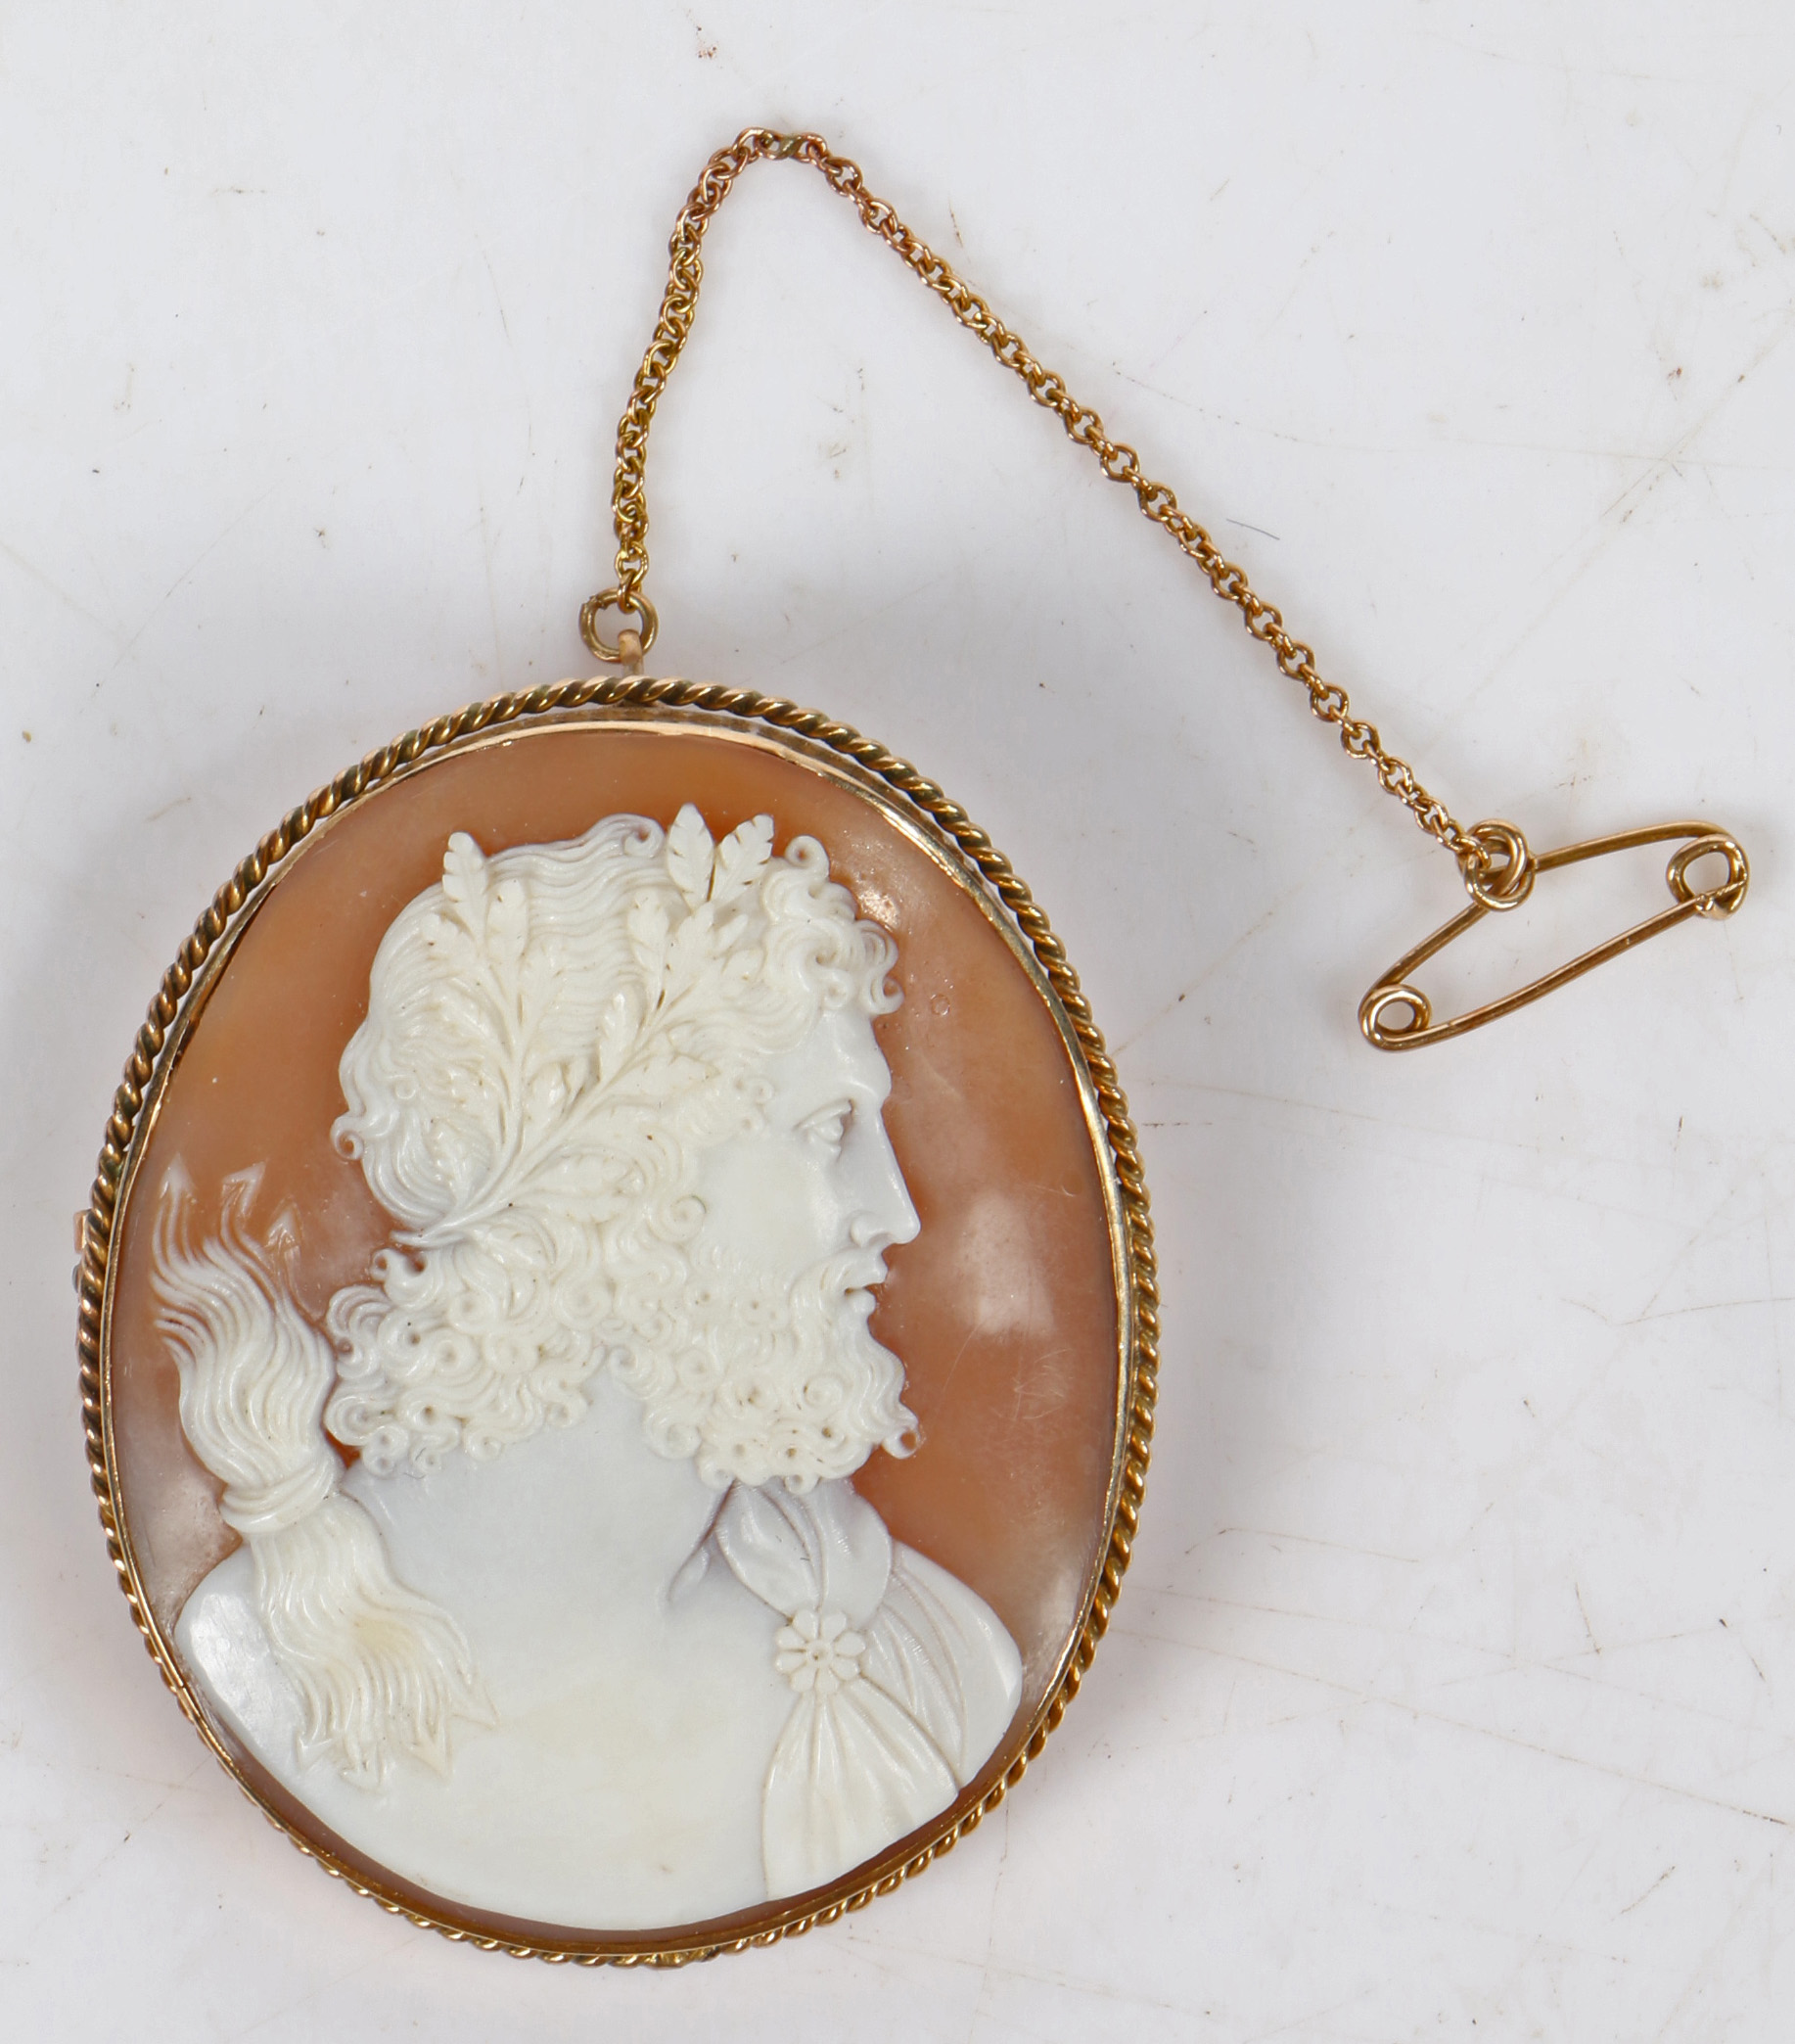 A 9 carat gold cameo brooch, the cameo depicting a classical bearded gentleman in profile with a